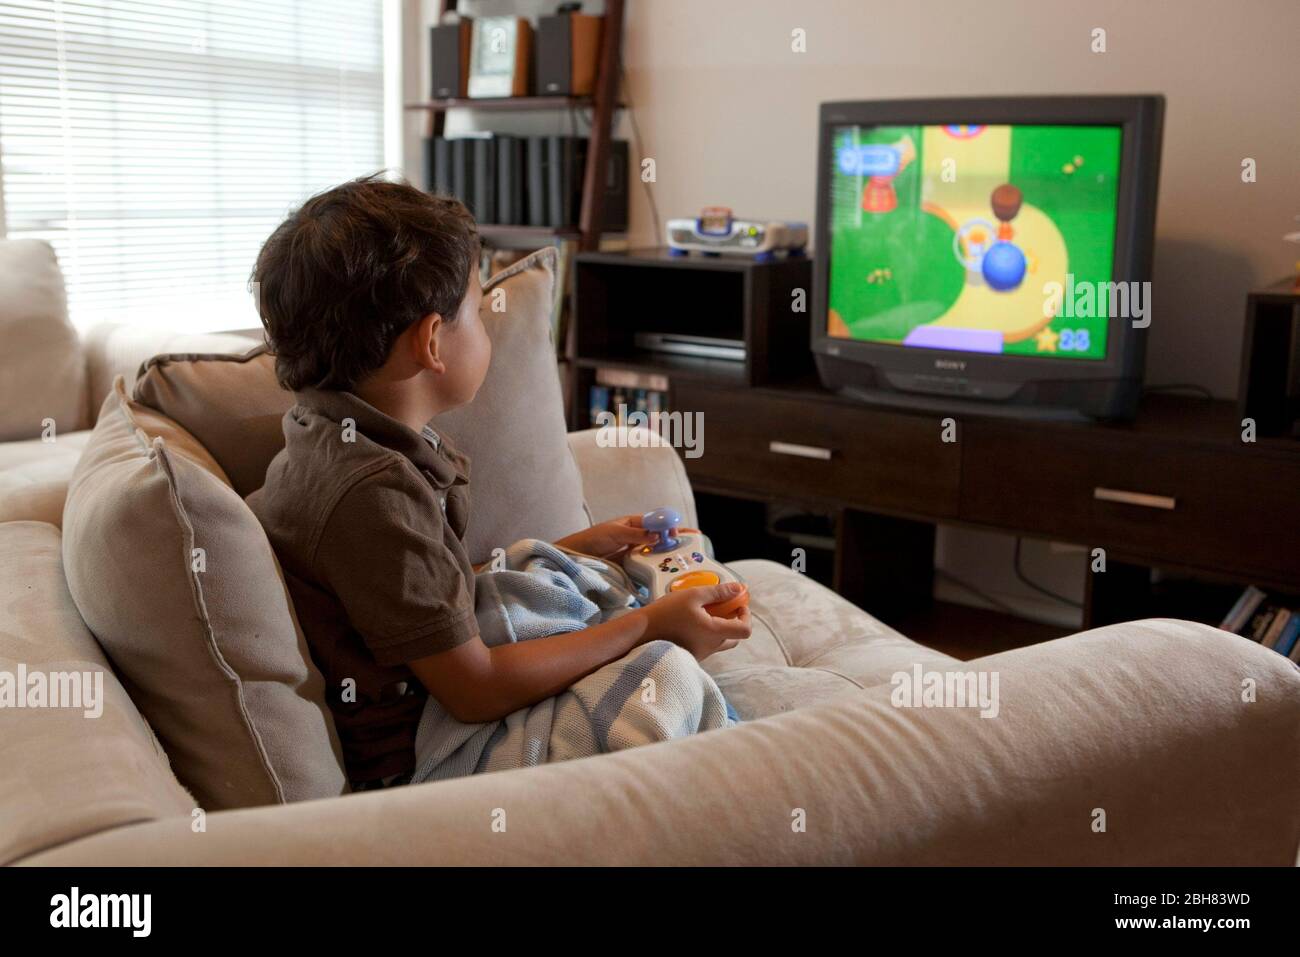 Austin, Texas  August 22, 2009:  Five-year old Mexican-American boy eating playing a video game while sitting in an over-stuffed chair at home on a Saturday morning. MR ©Bob Daemmrich Stock Photo